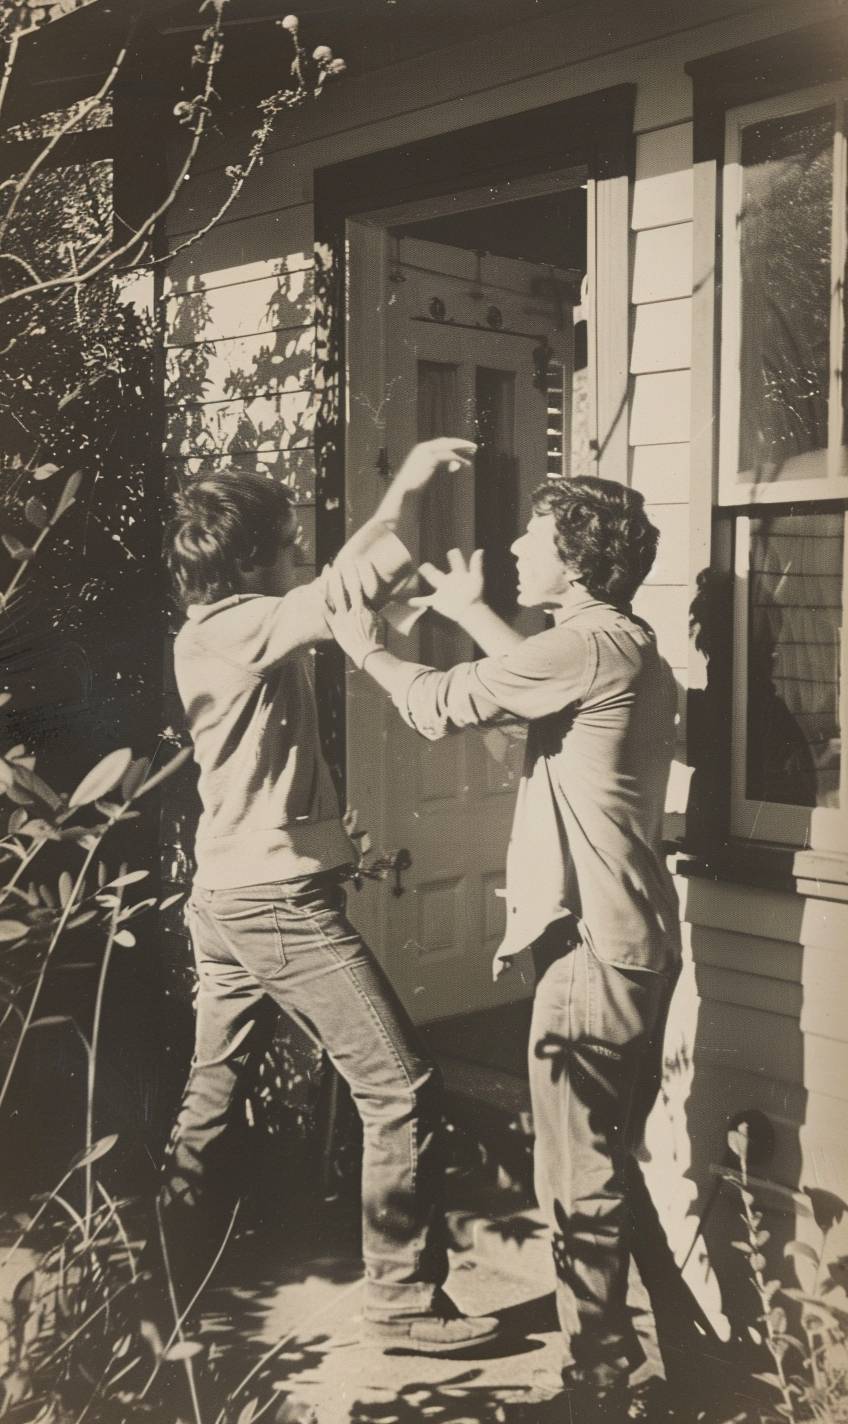 Two men, brothers, one with hair, arguing outside a house on a patio in 1980, realistic arms, vintage photograph, flash photography